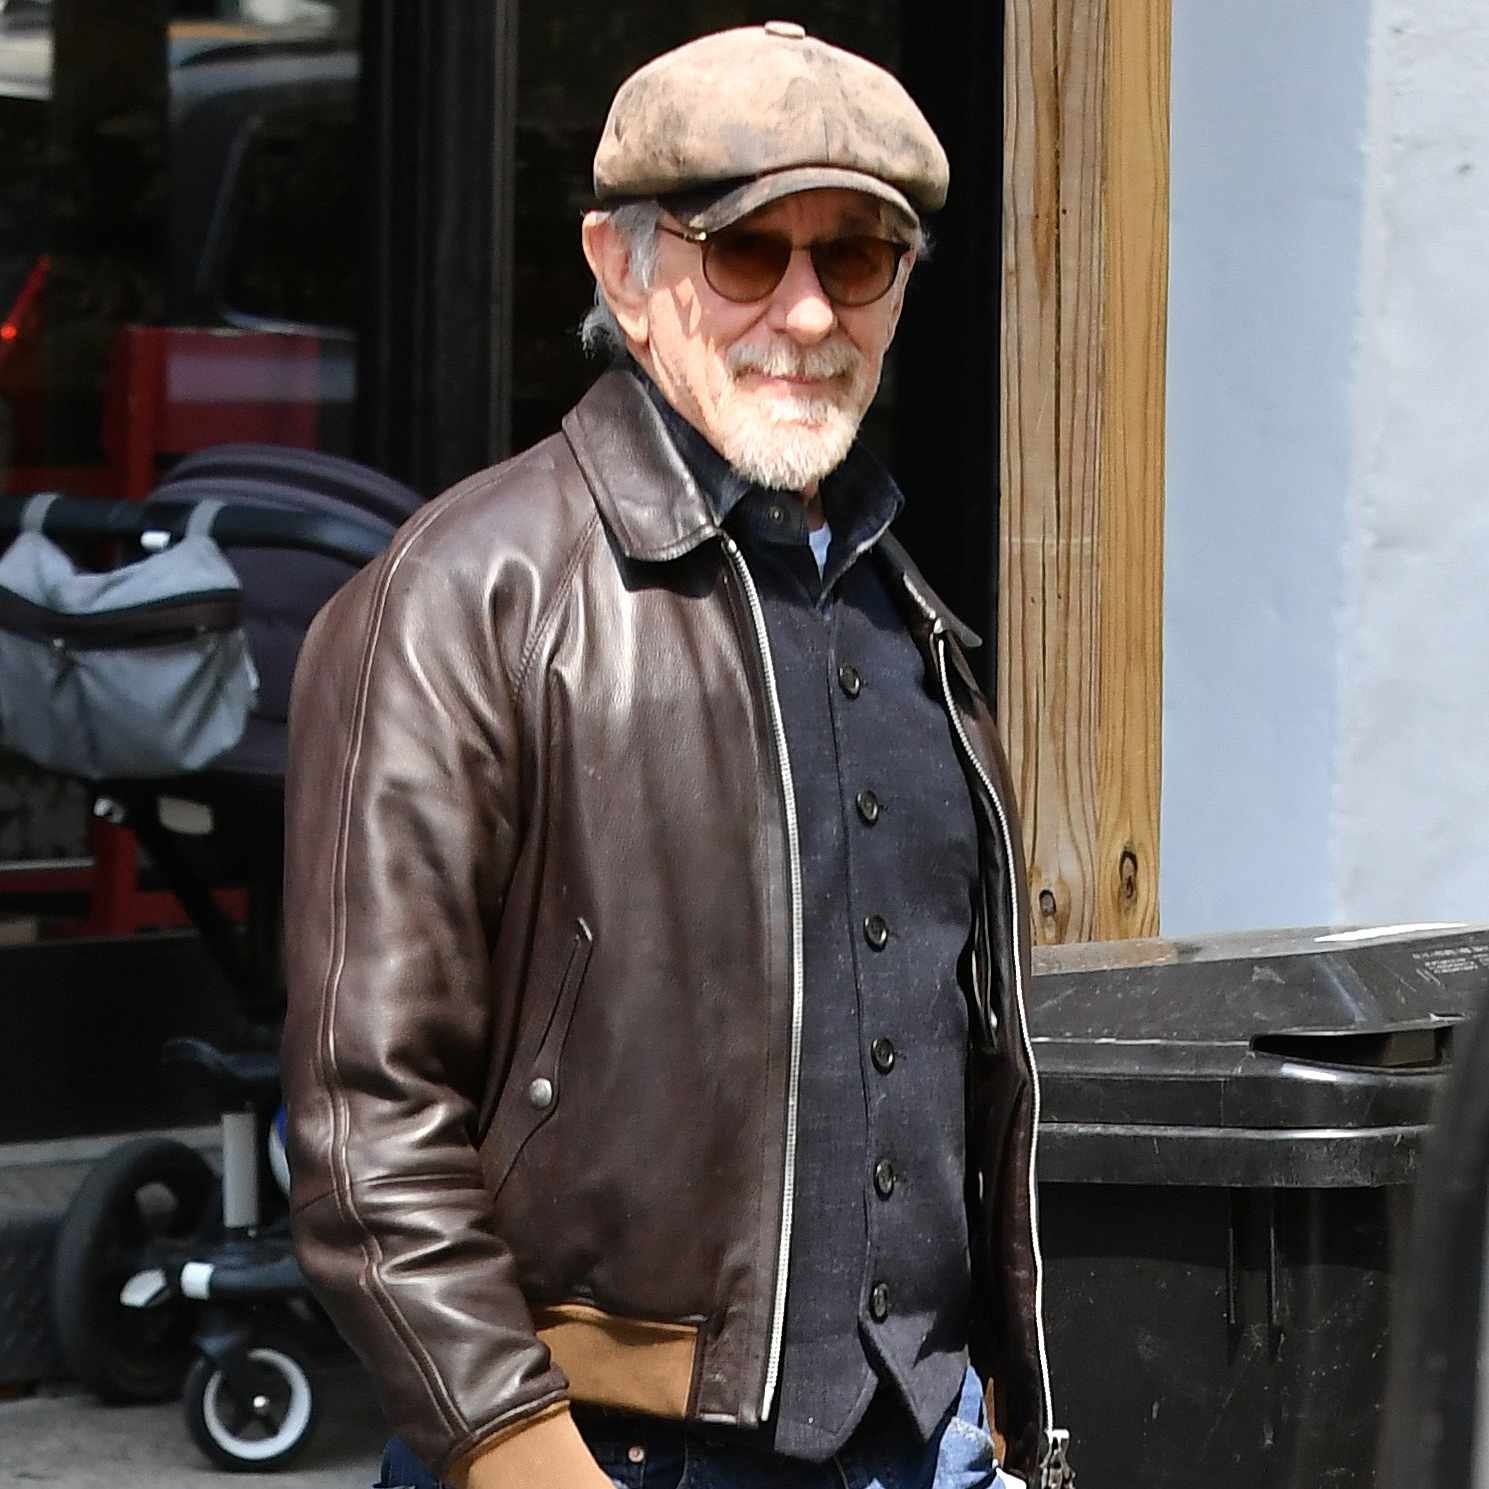 Steven Spielberg and Kate Capshaw meet with friends at a restaurant in New York City